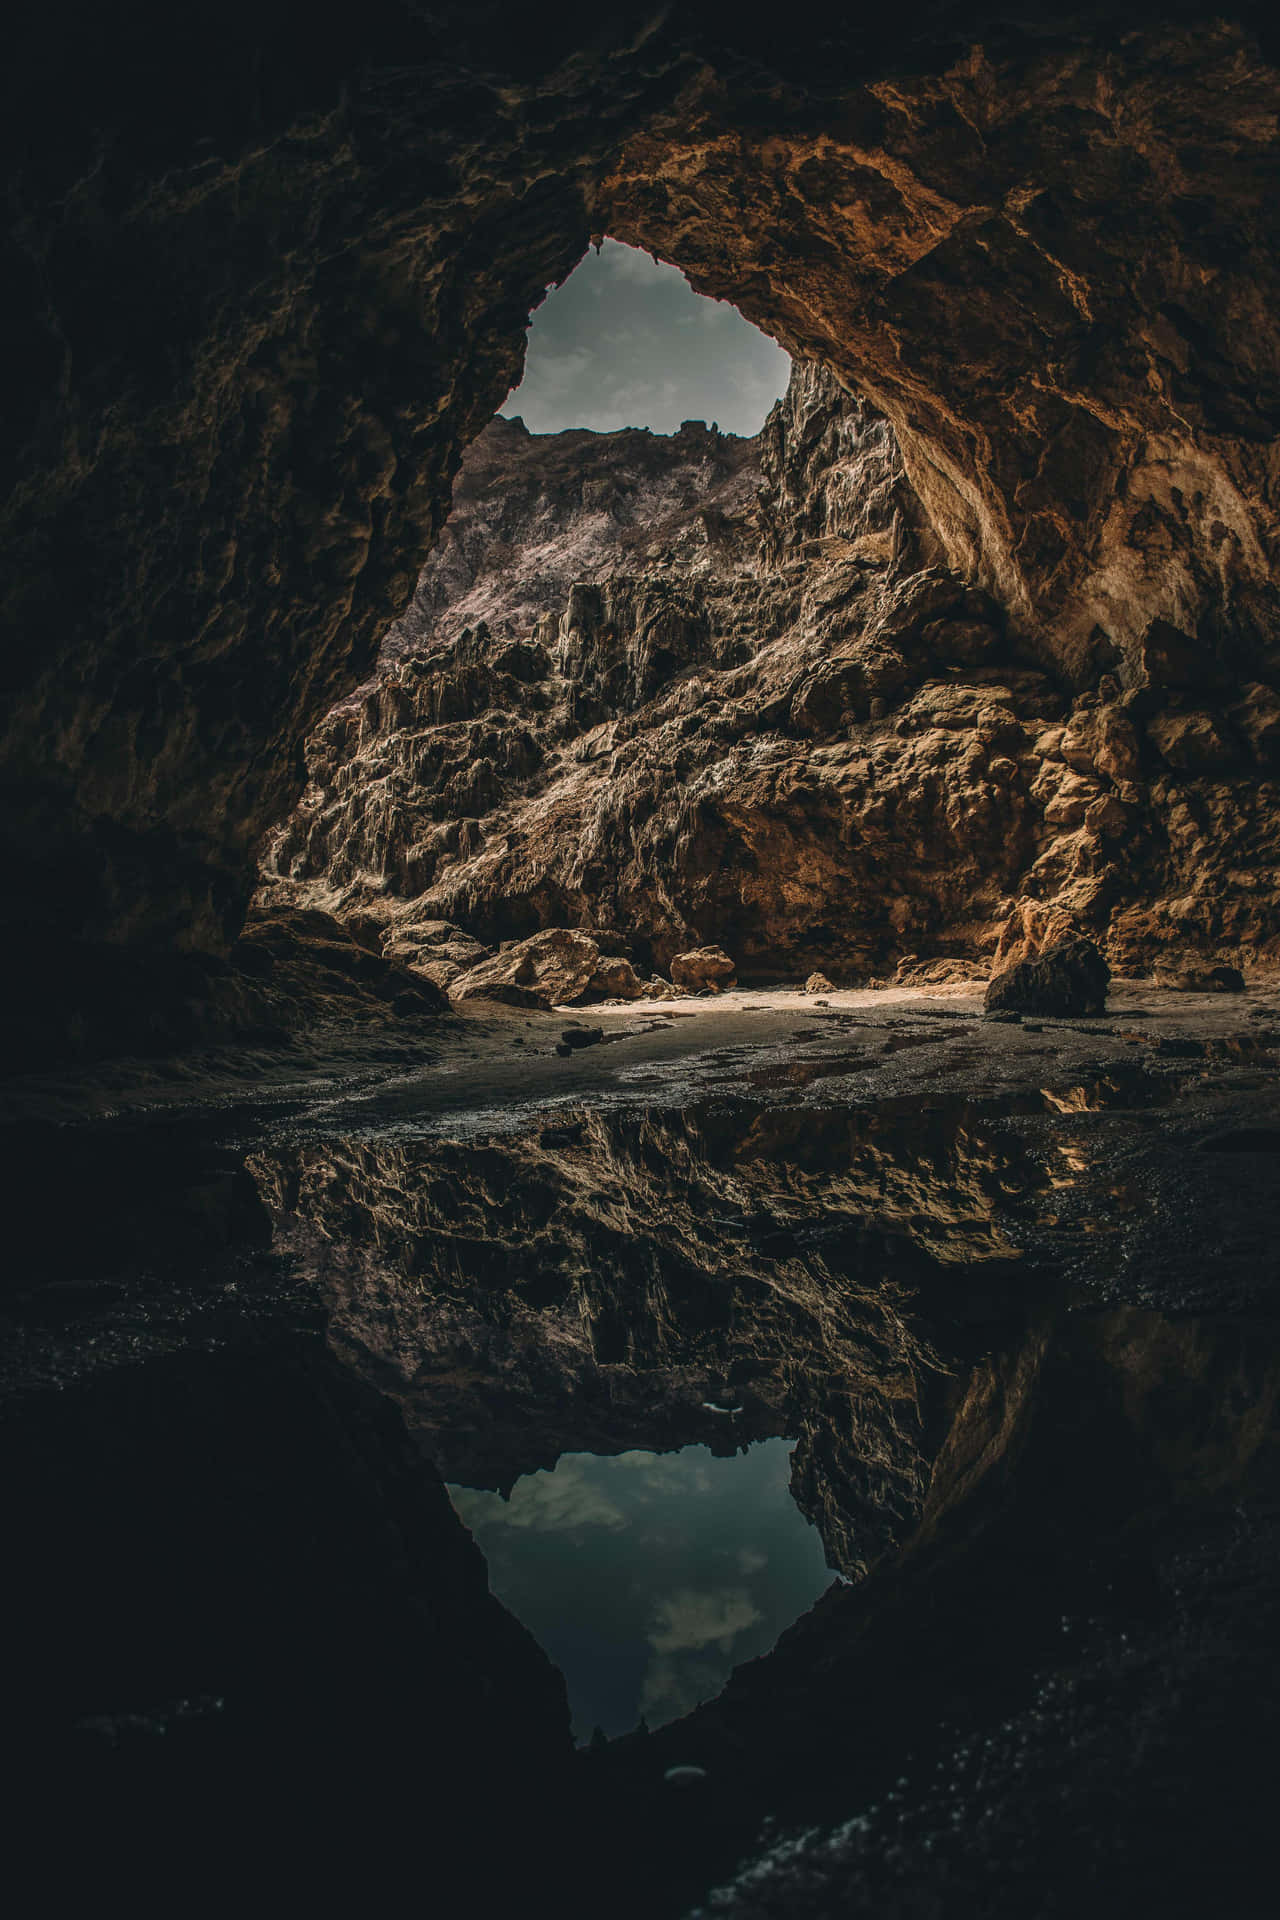 A Cave With A Reflection In The Water